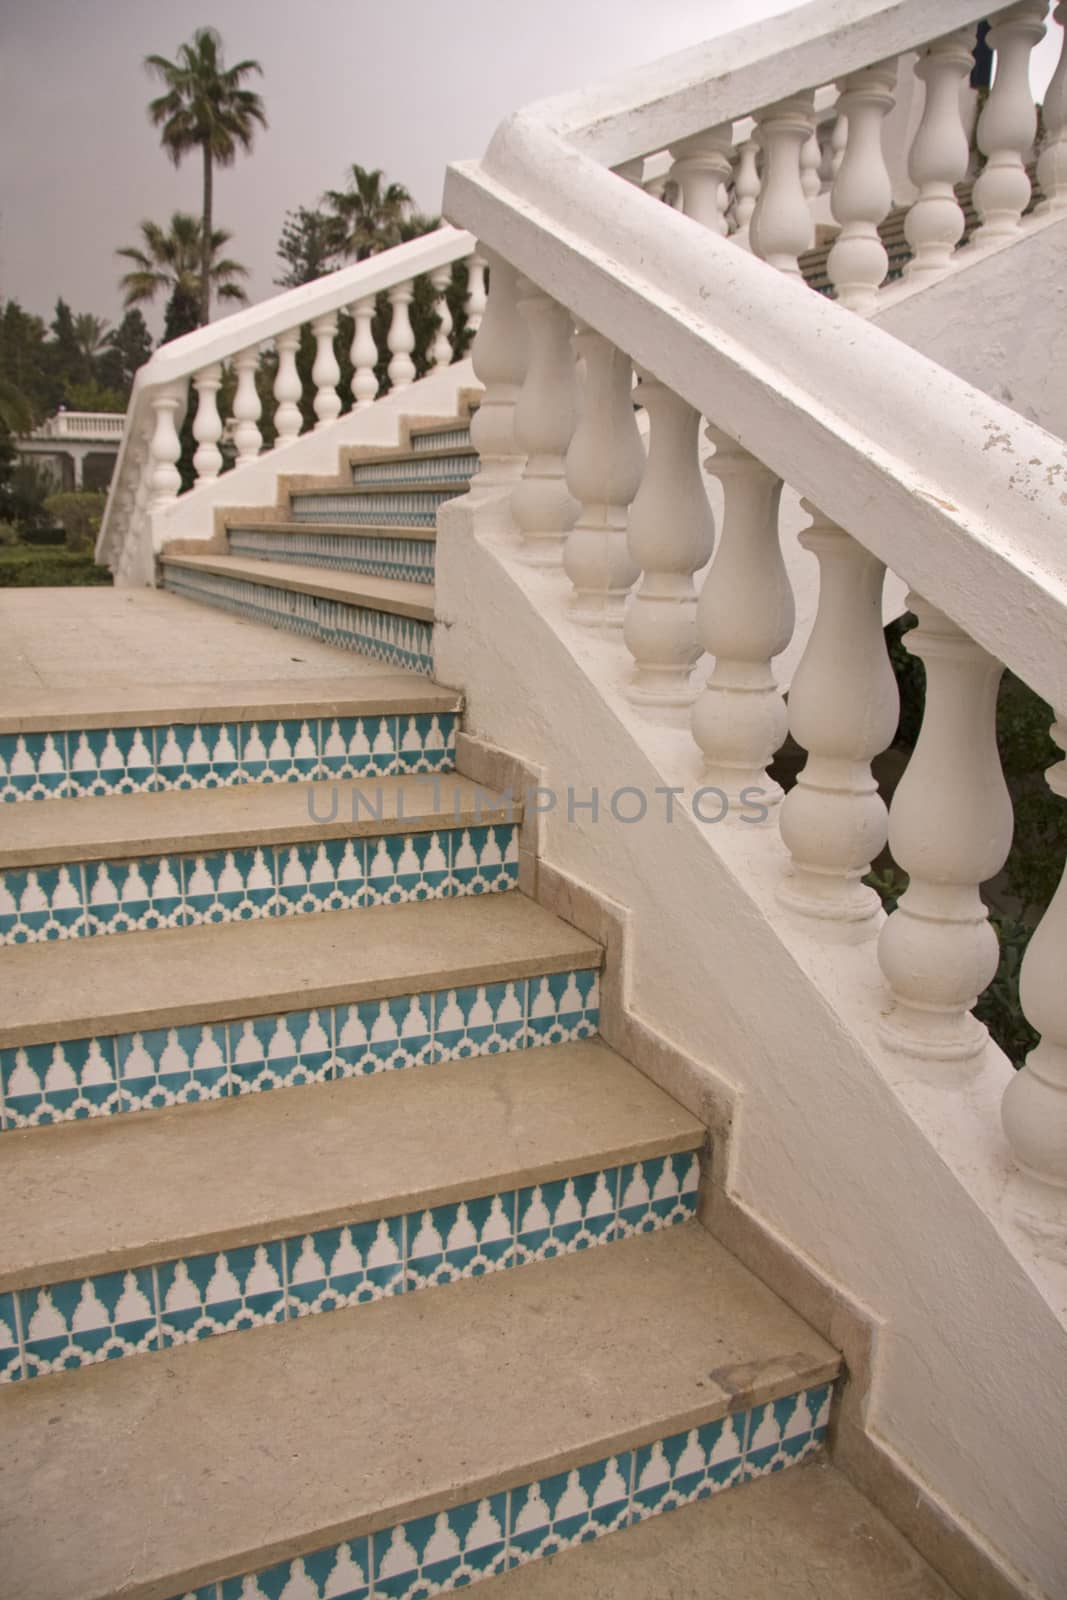 Decorated stairs in nice perspective, Tunisia